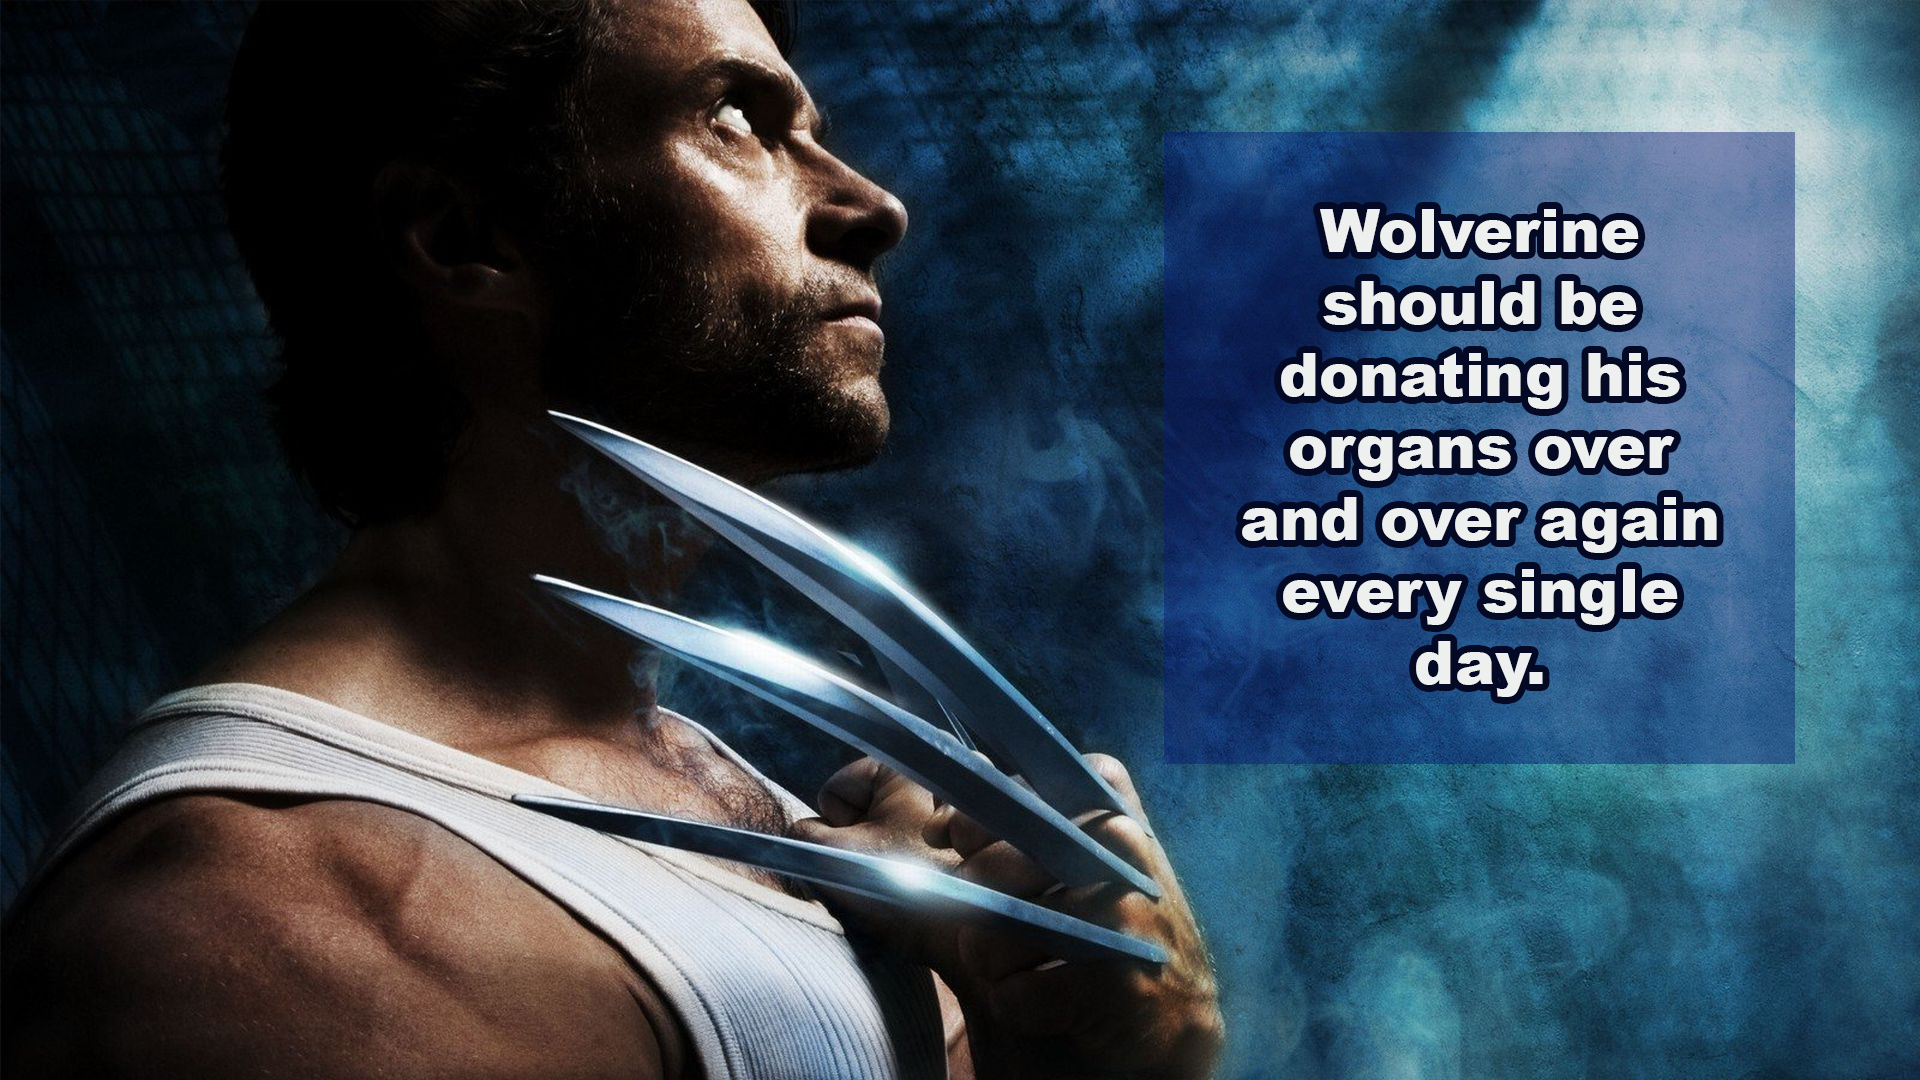 wolverine the movie - Wolverine should be donating his organs over and over again every single day.